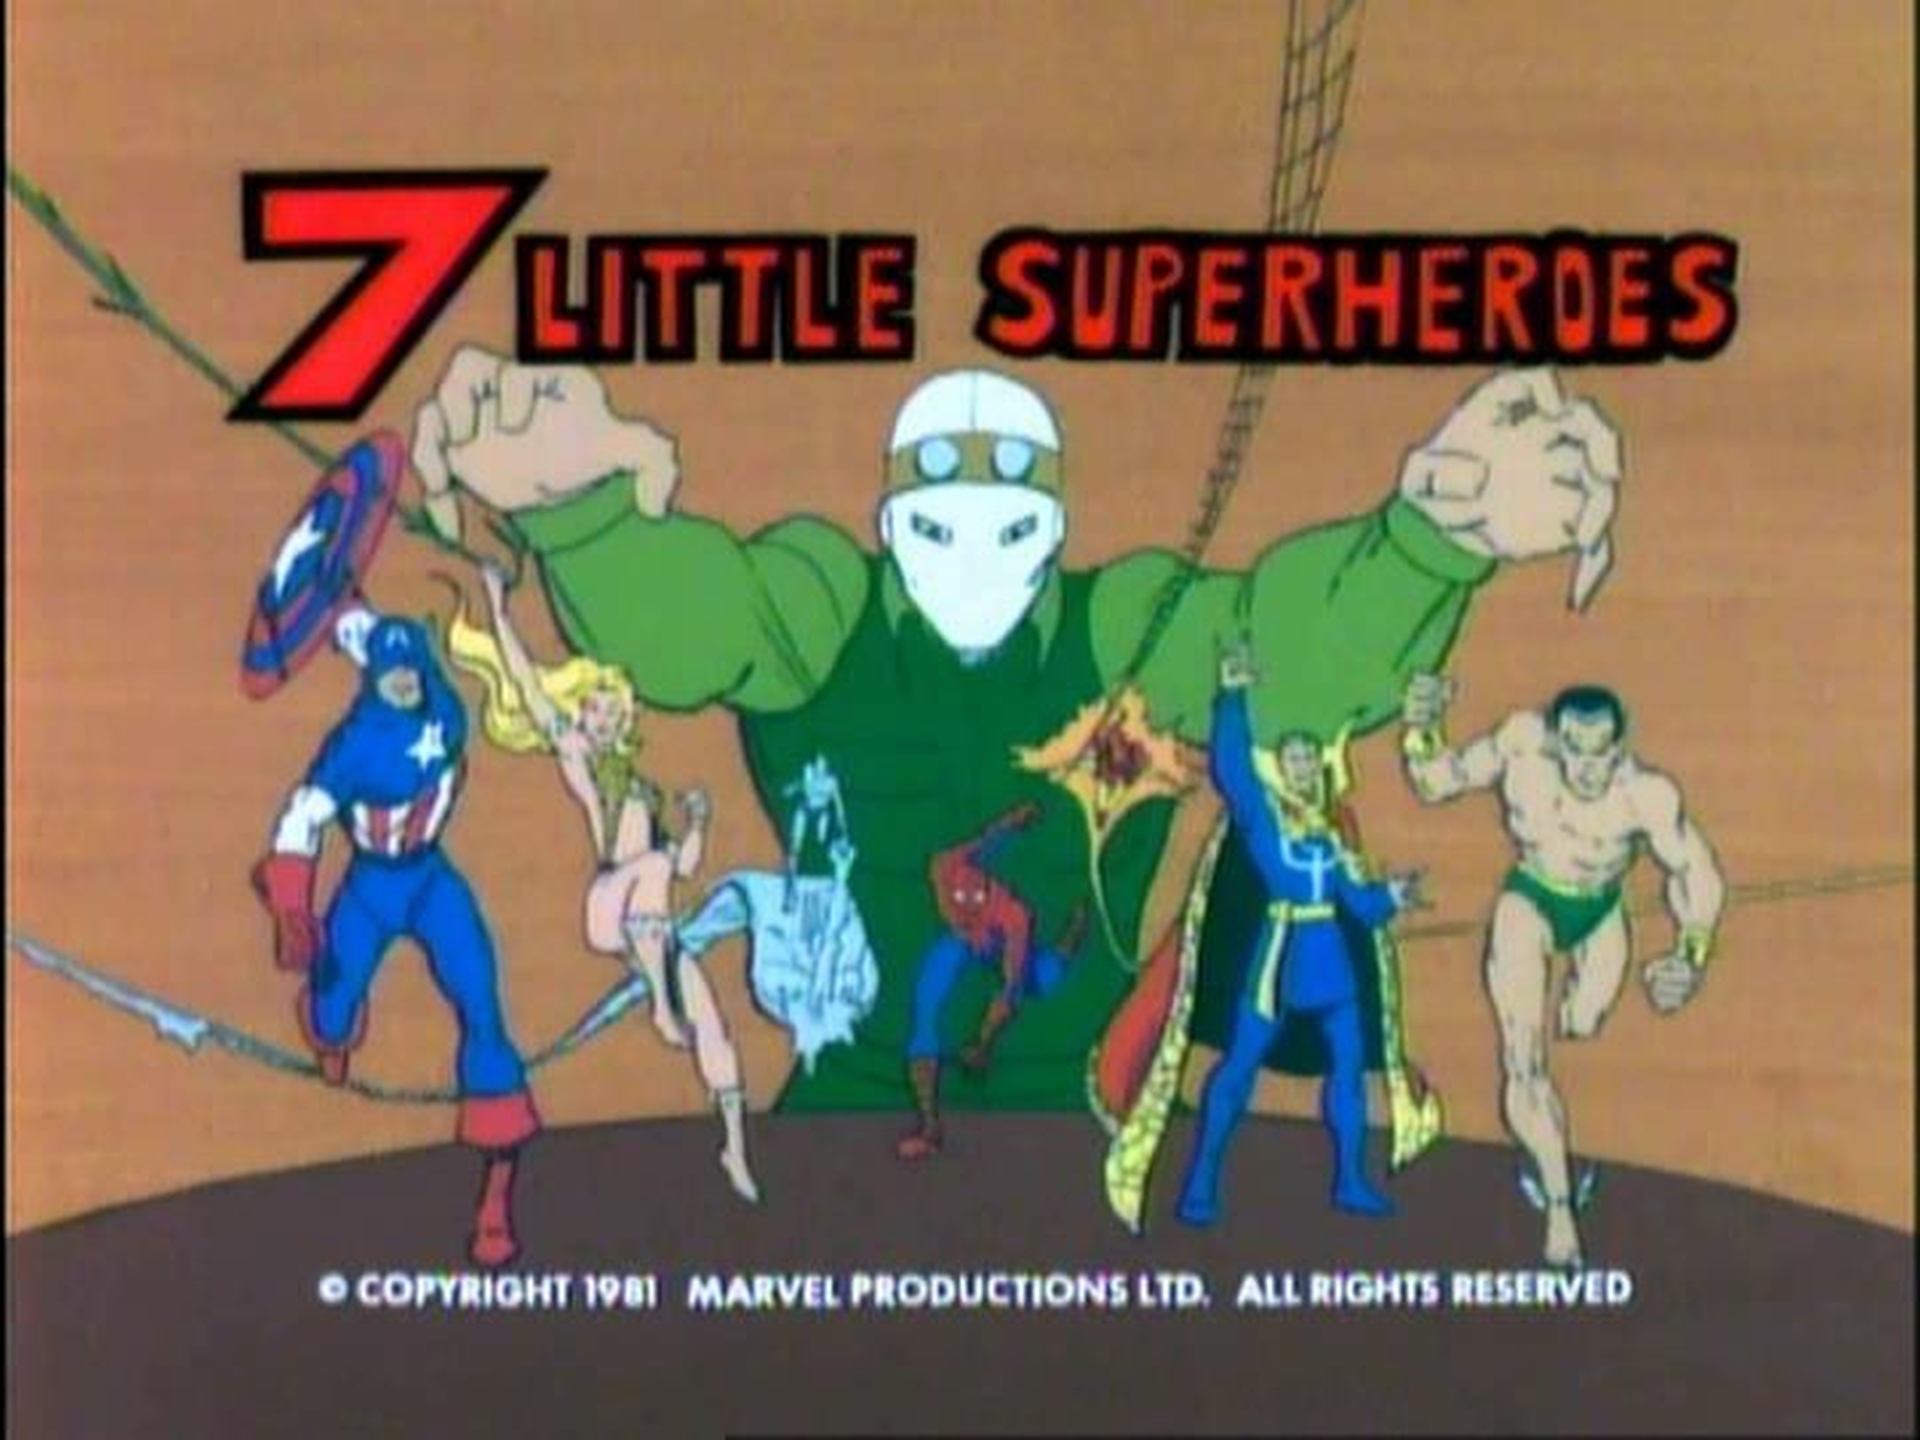 Spider-Man and His Amazing Friends: 7 Little Superheroes | Season 1 | Episode 6